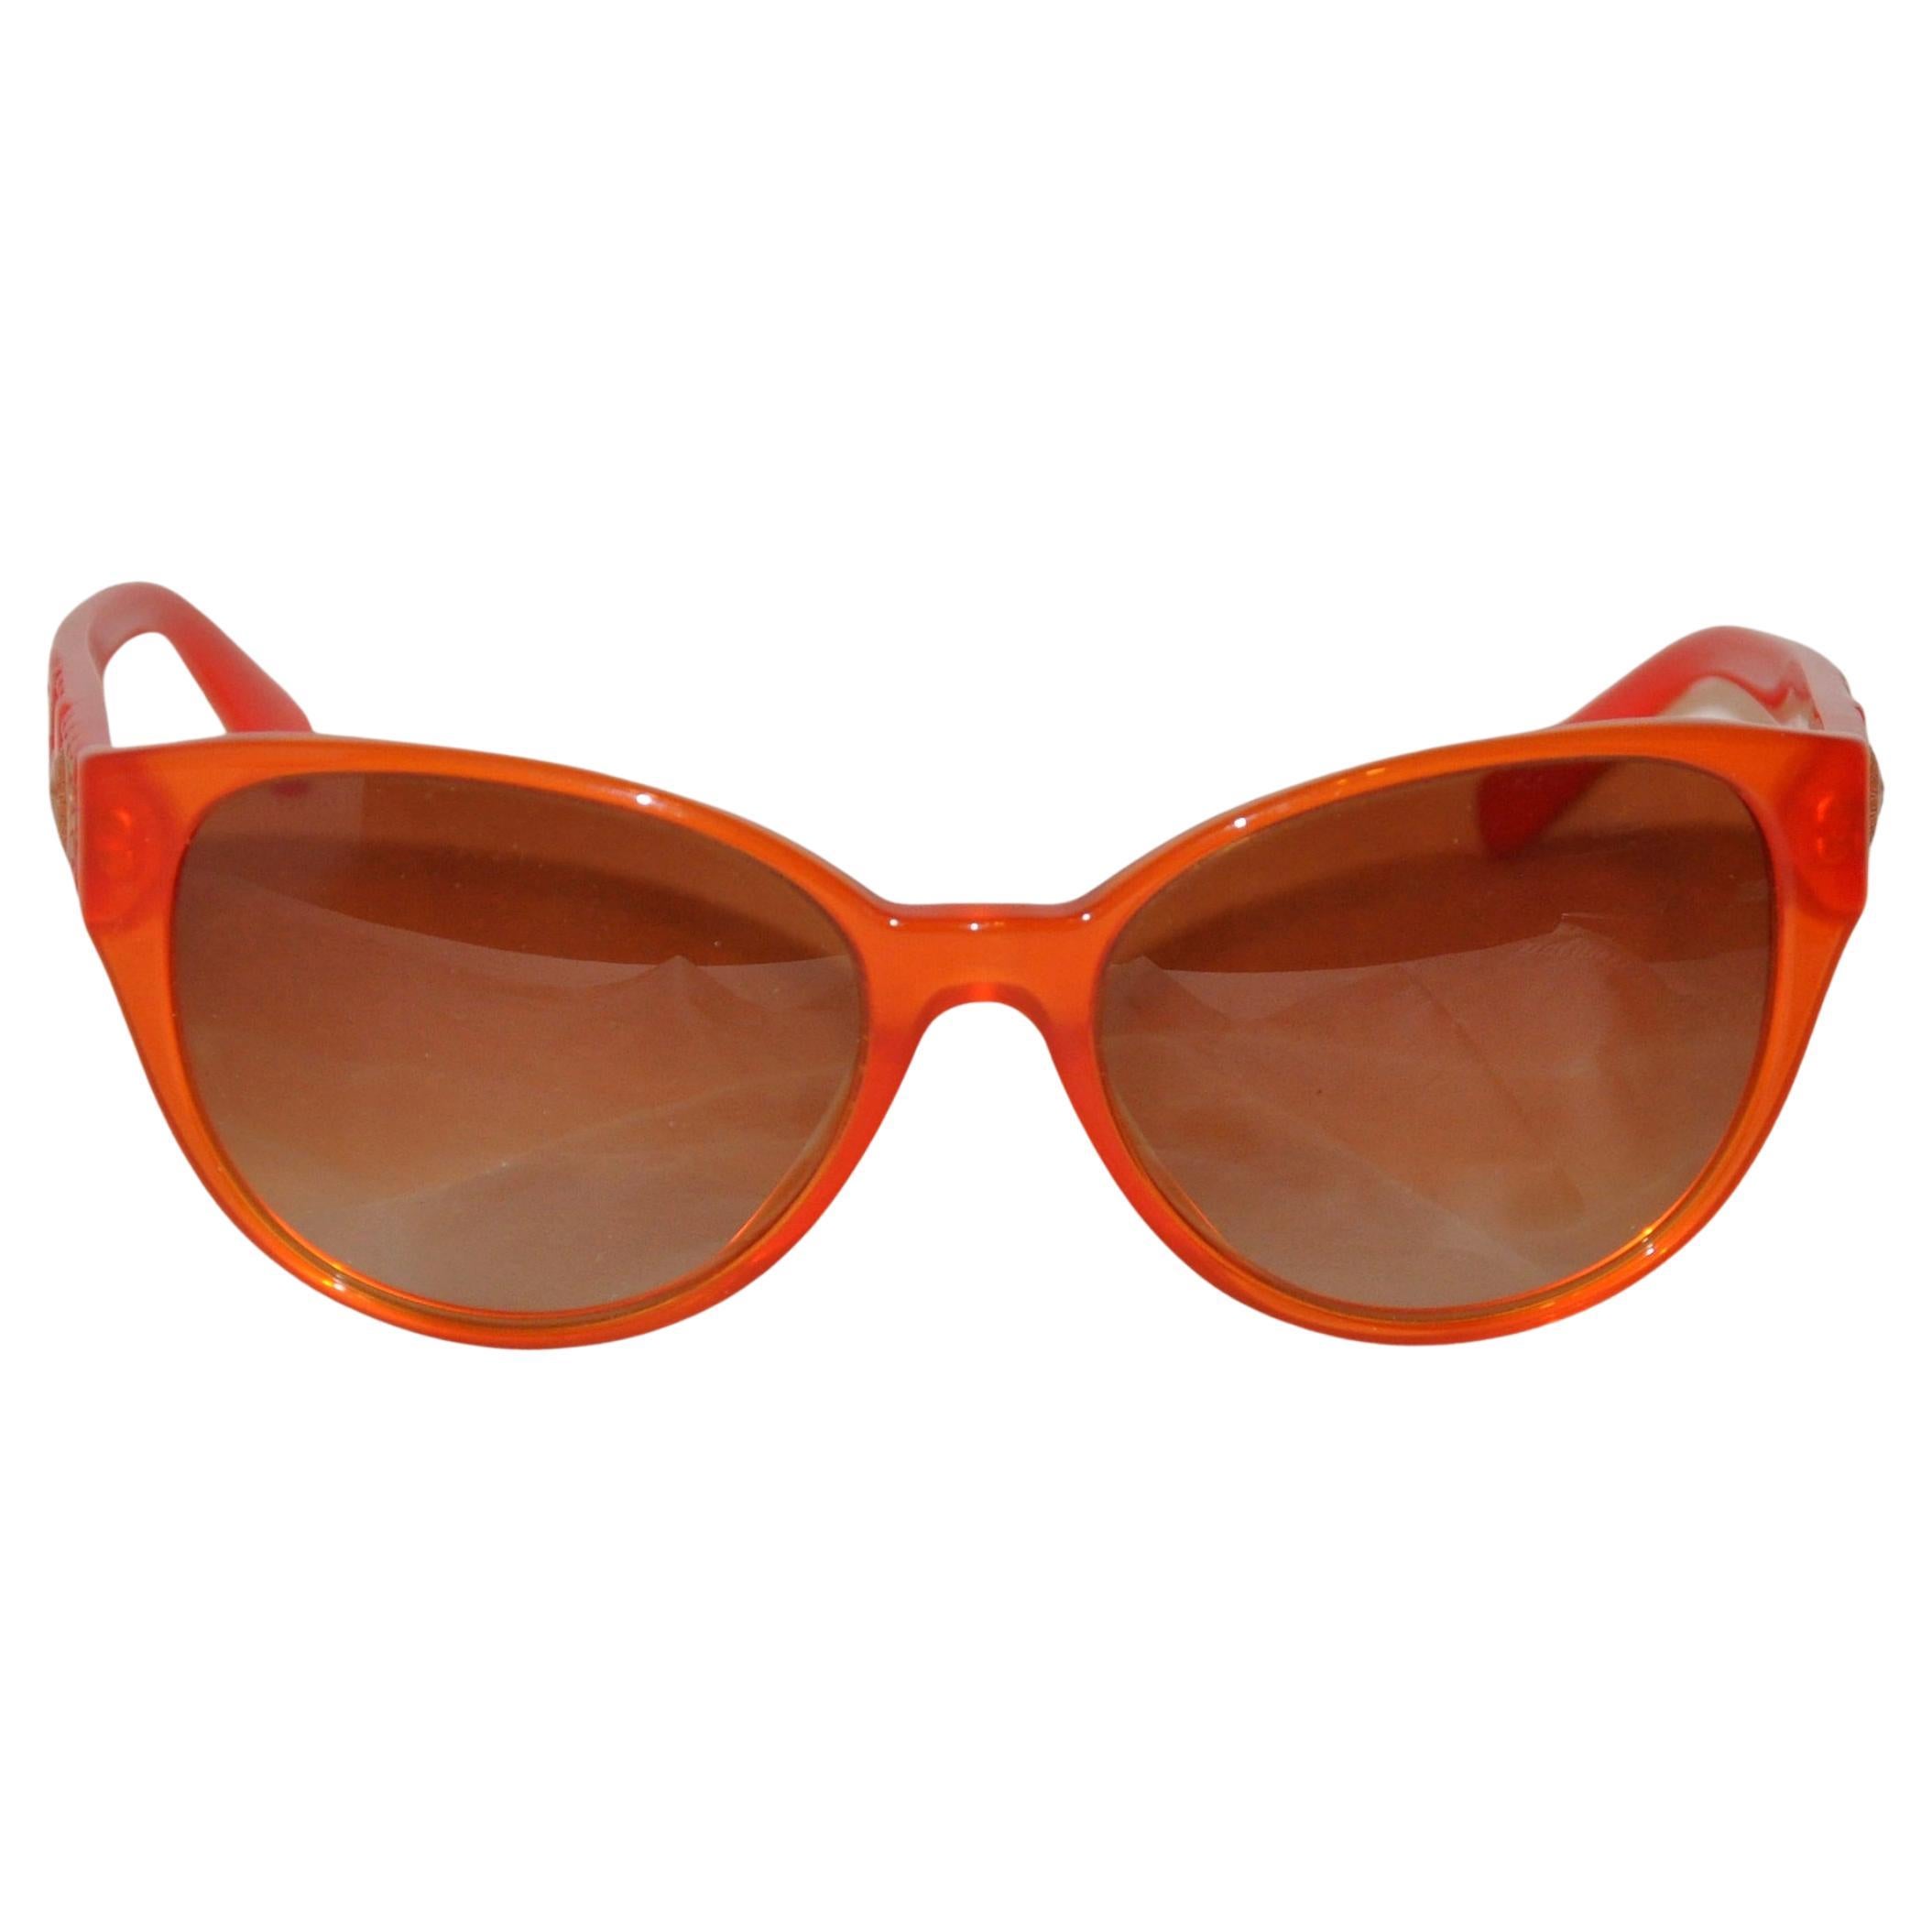 Versace Bold Tangerine with Signature Logo and gold hardware studs Sunglasses